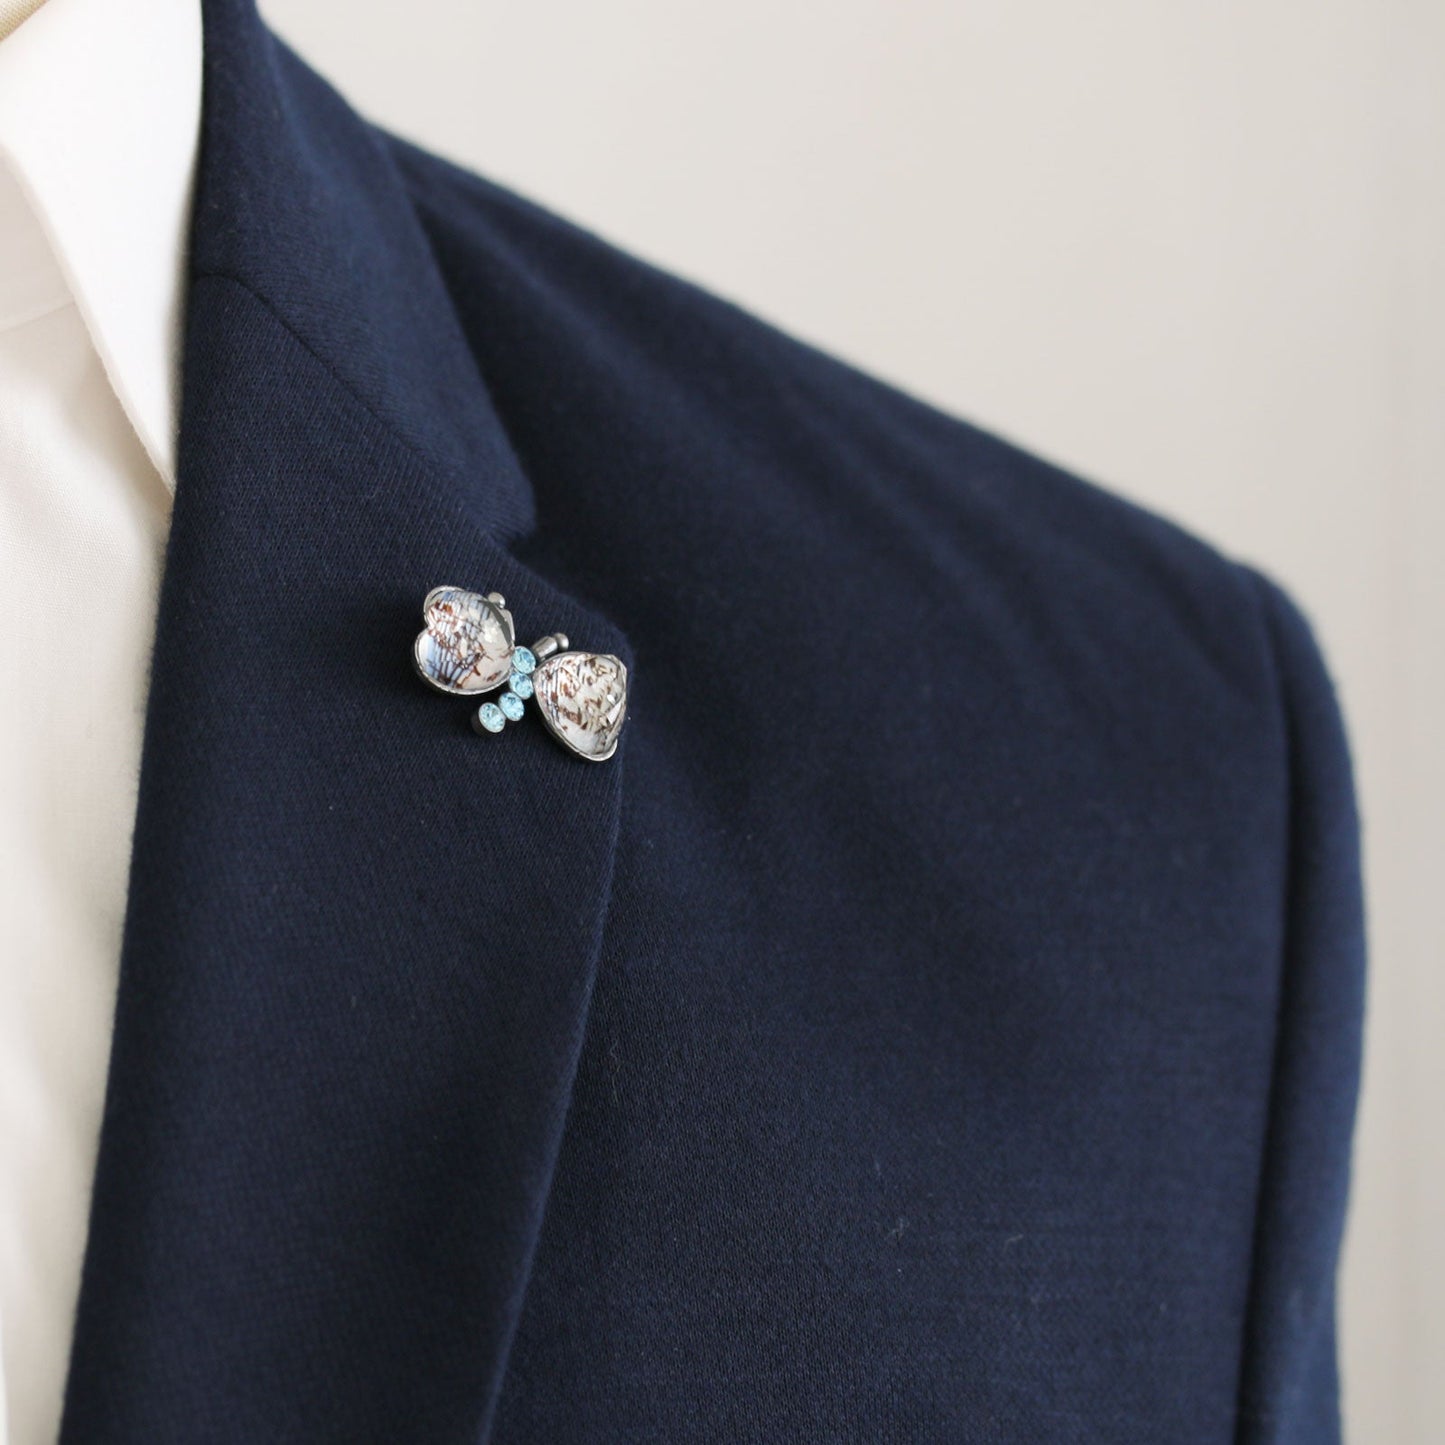 Pin Brooch Butterfly Blue Musical Note TAMARUSAN